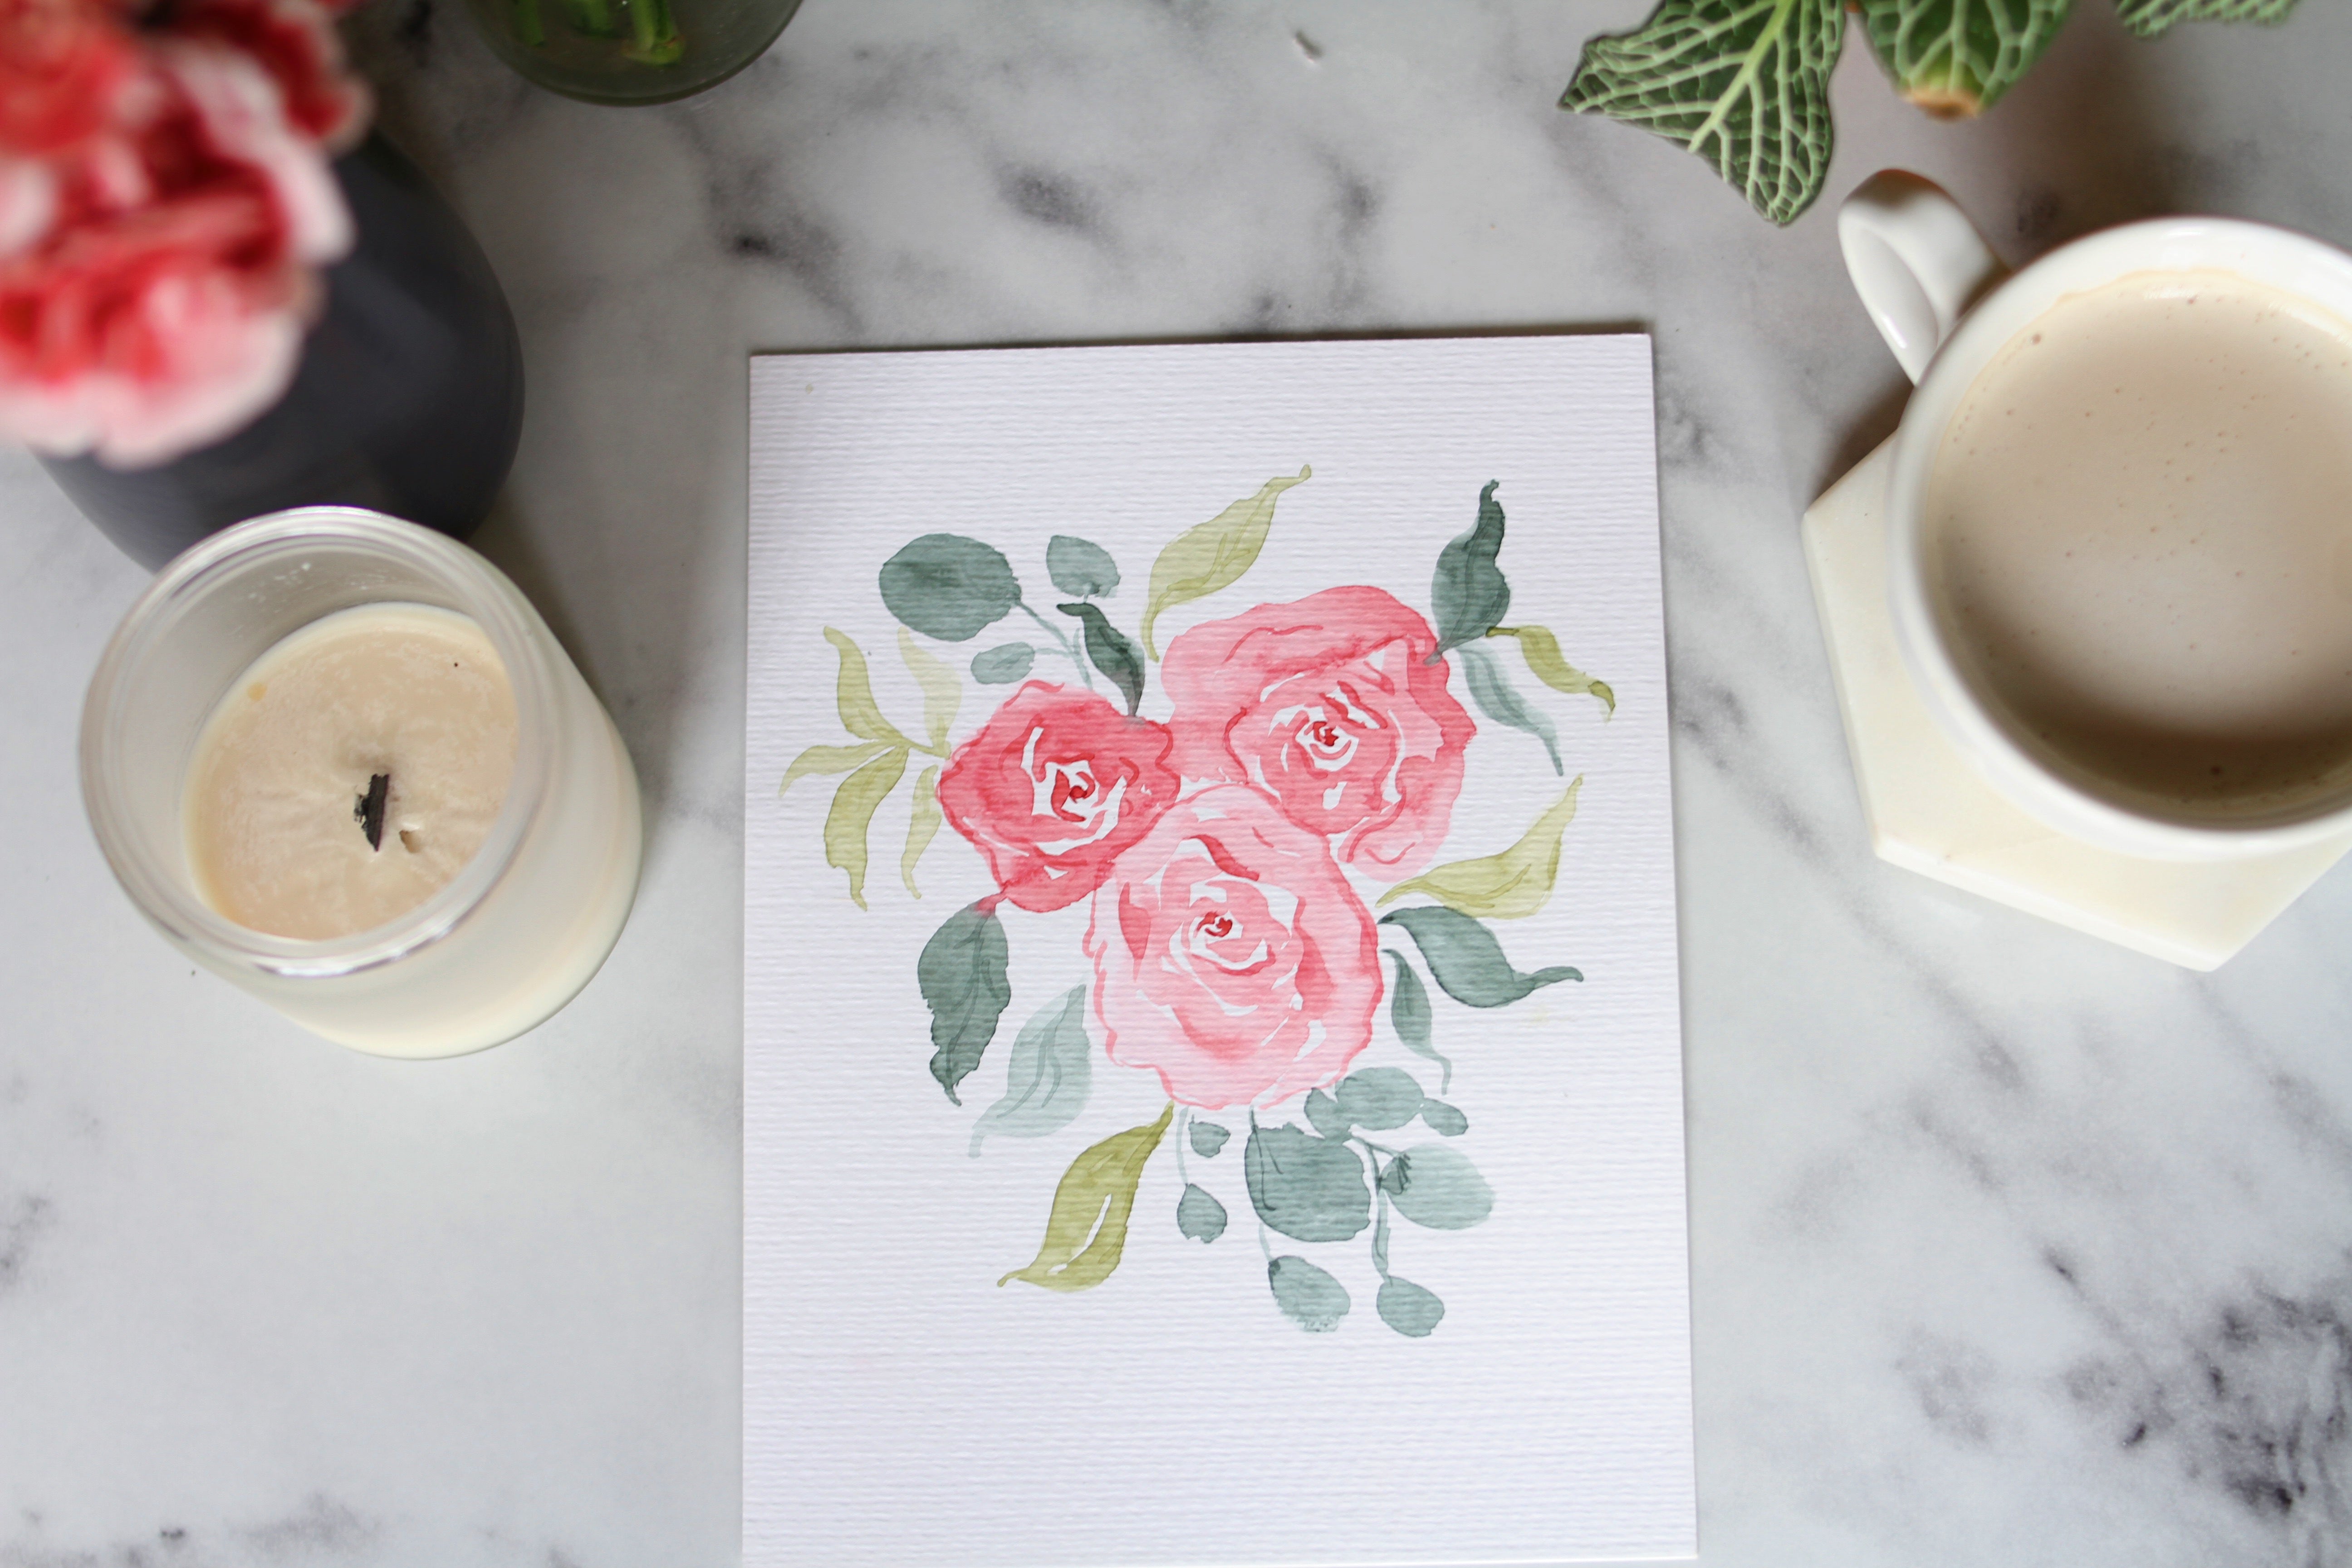 6x8 hand-painted rose cluster